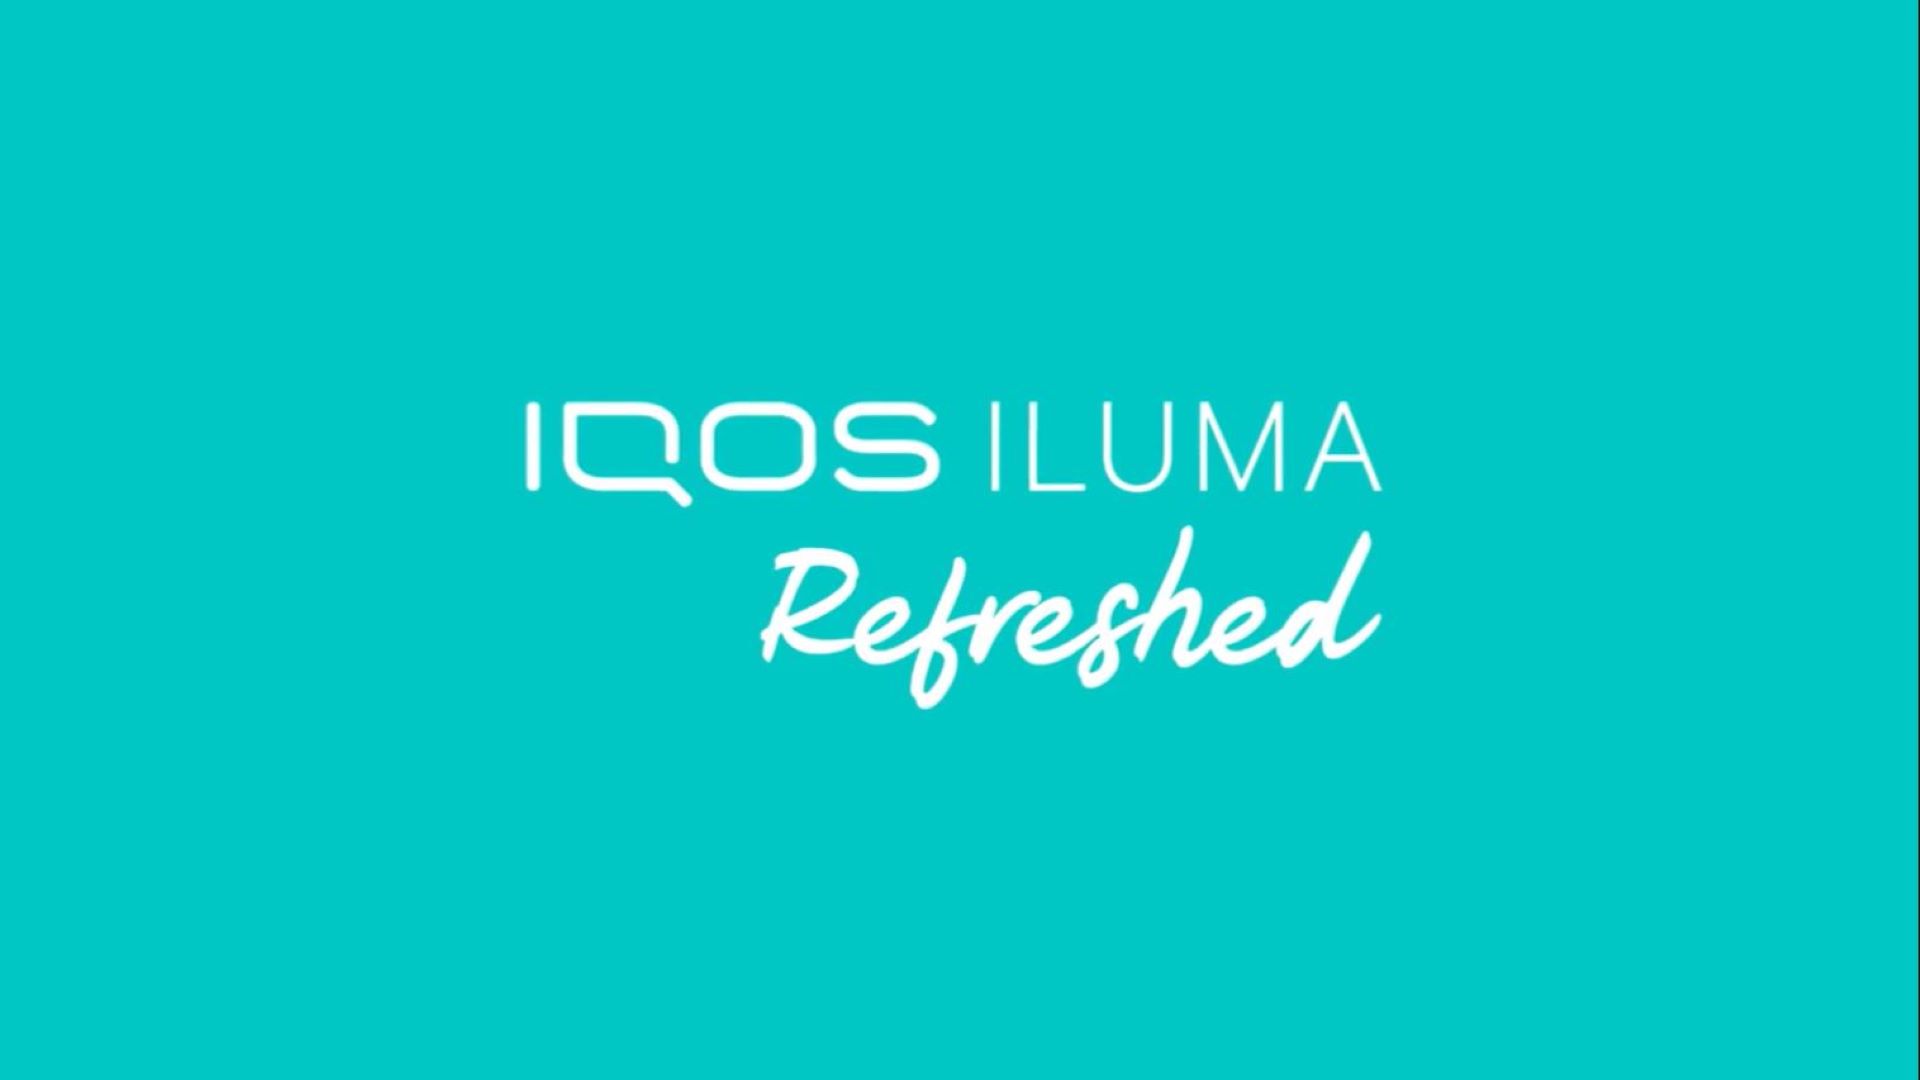 IQOS 3 DUO Refreshed